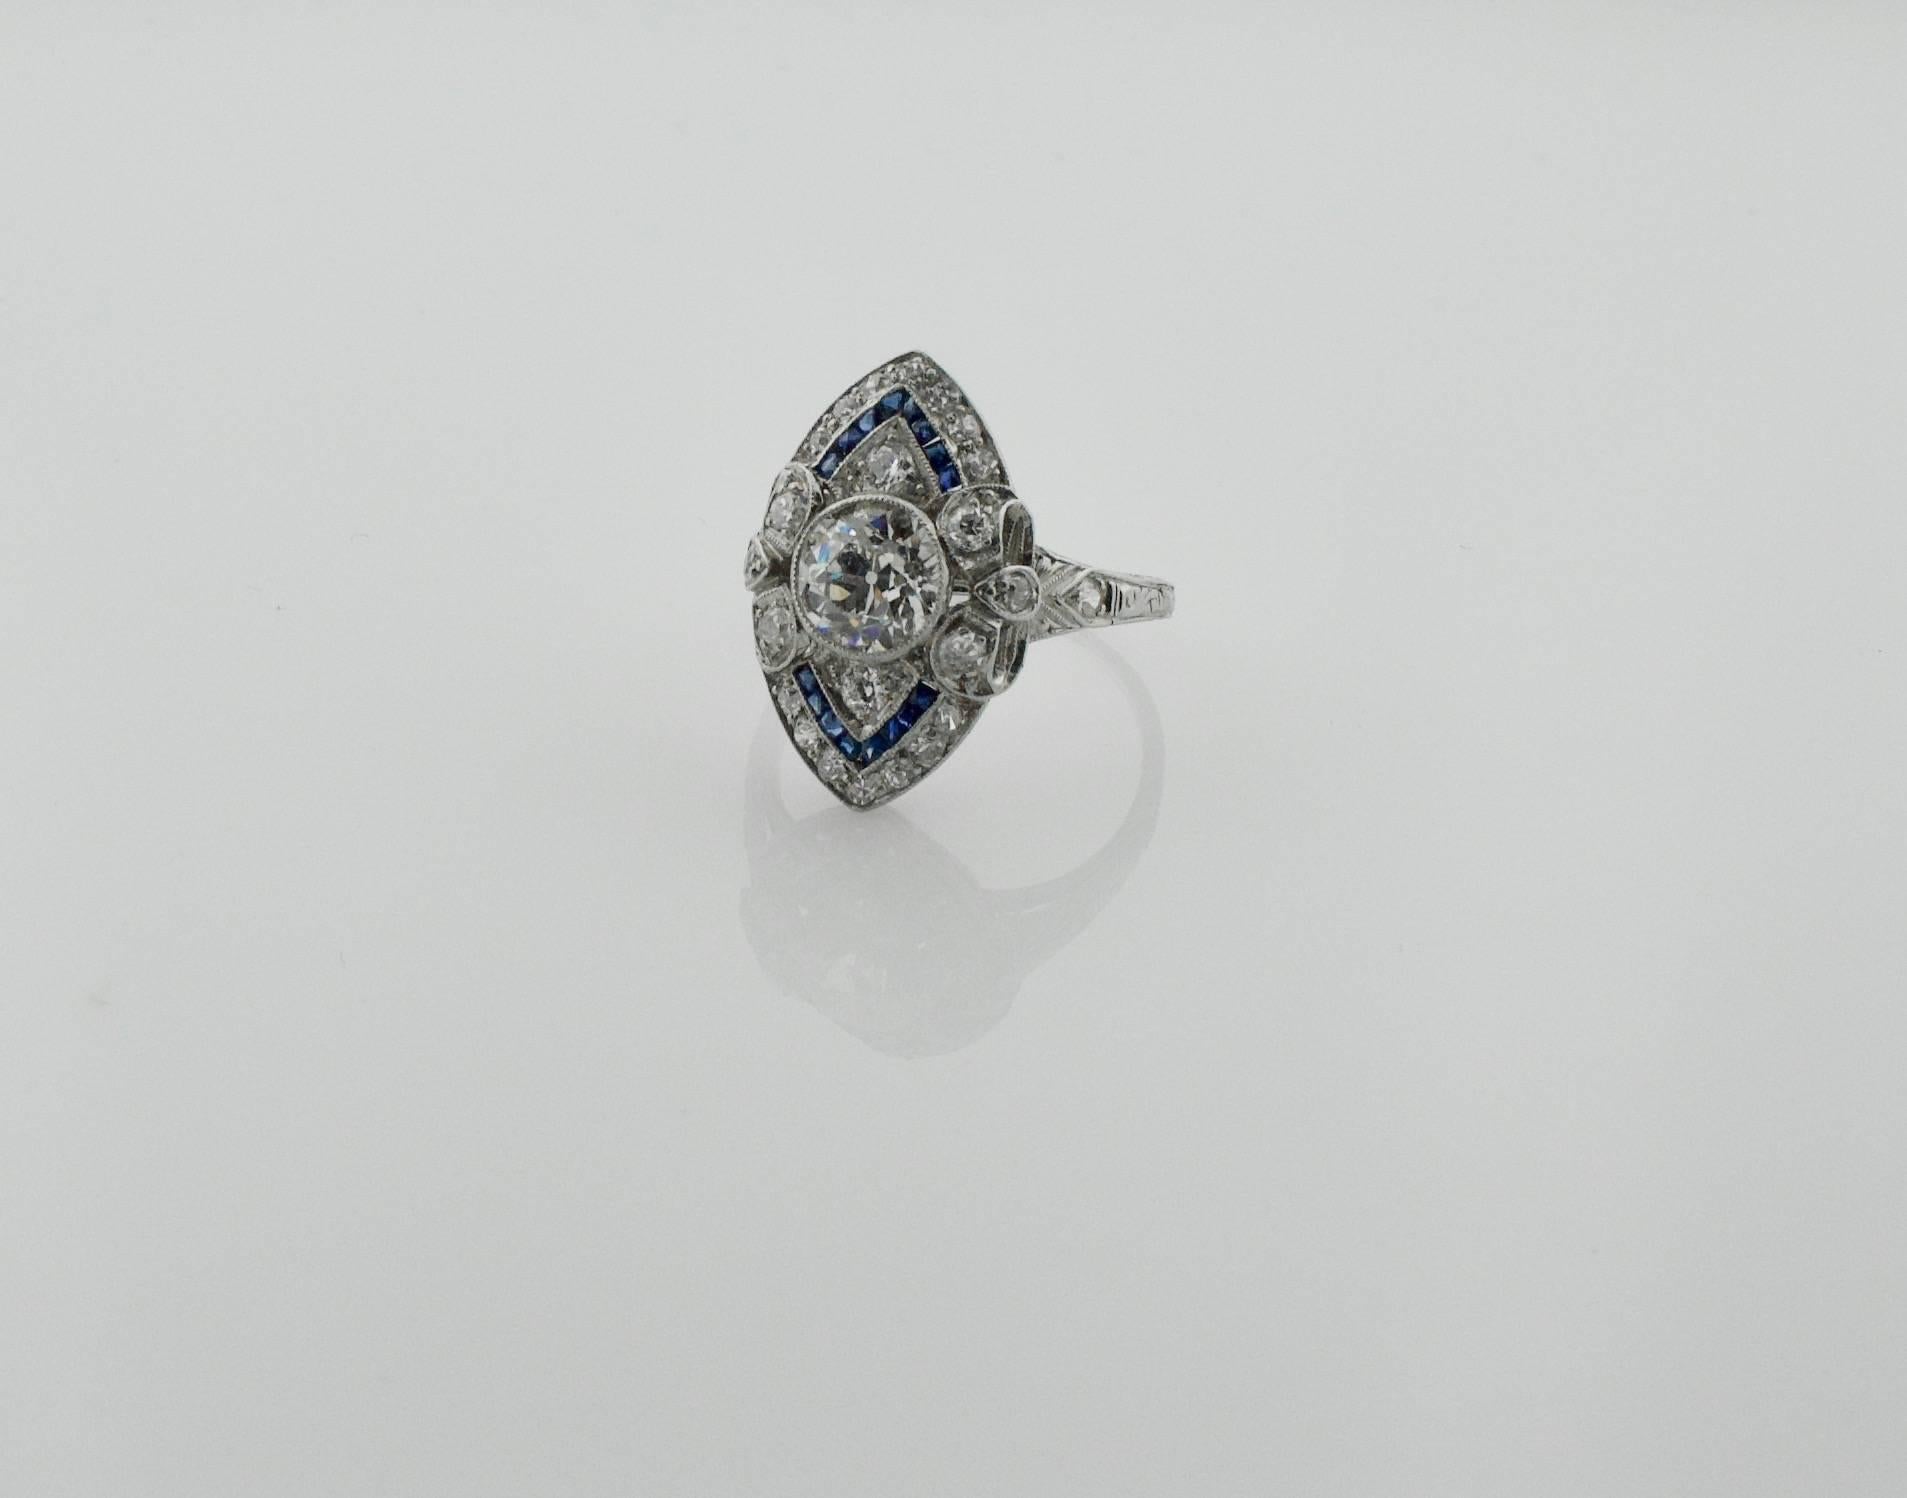 Diamond and Sapphire  Ring in Platinum
One Certified Old European Cut Diamond weighing 1.18 carats [J-VS2]
Twenty Four Old European and Single Cut  Diamonds weighing .70 carats approximately
Sixteen French Cut Calibrated Sapphires weighing .25